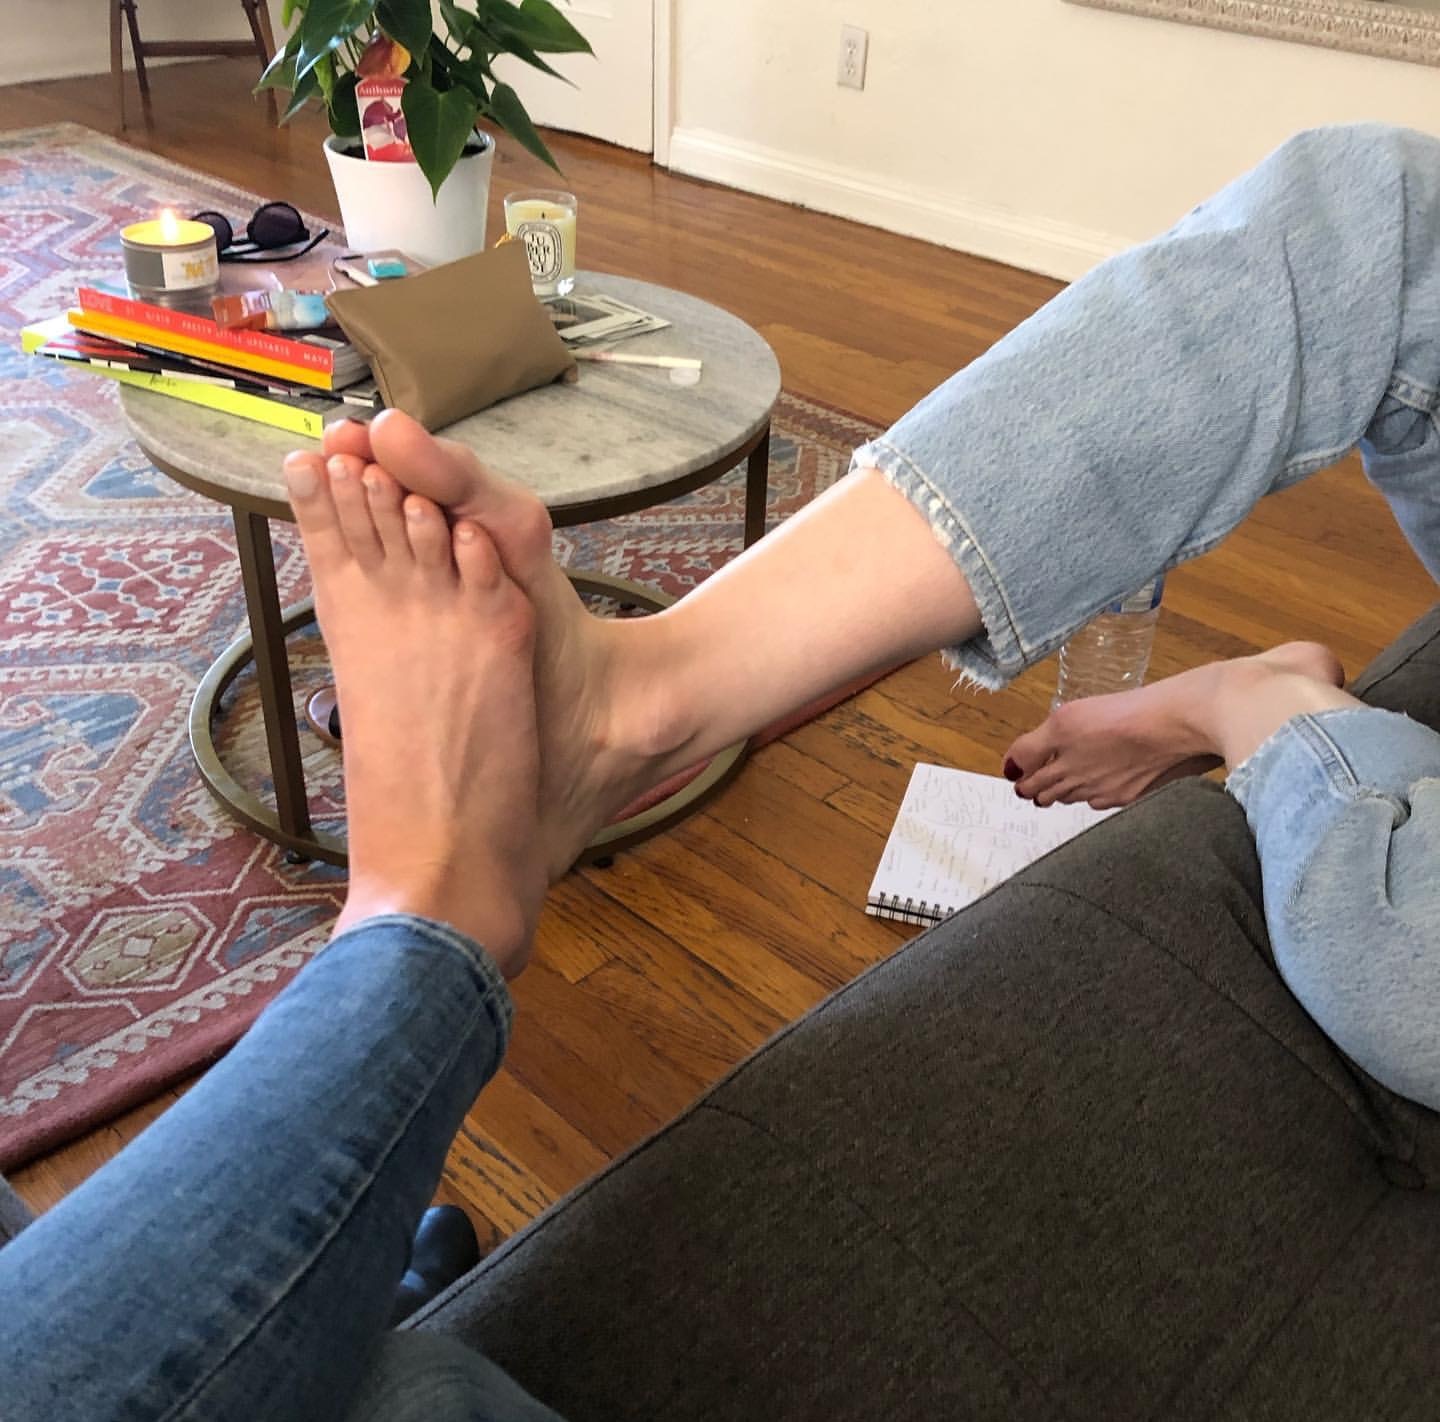 People who liked Lauren Lapkus's feet, also liked.